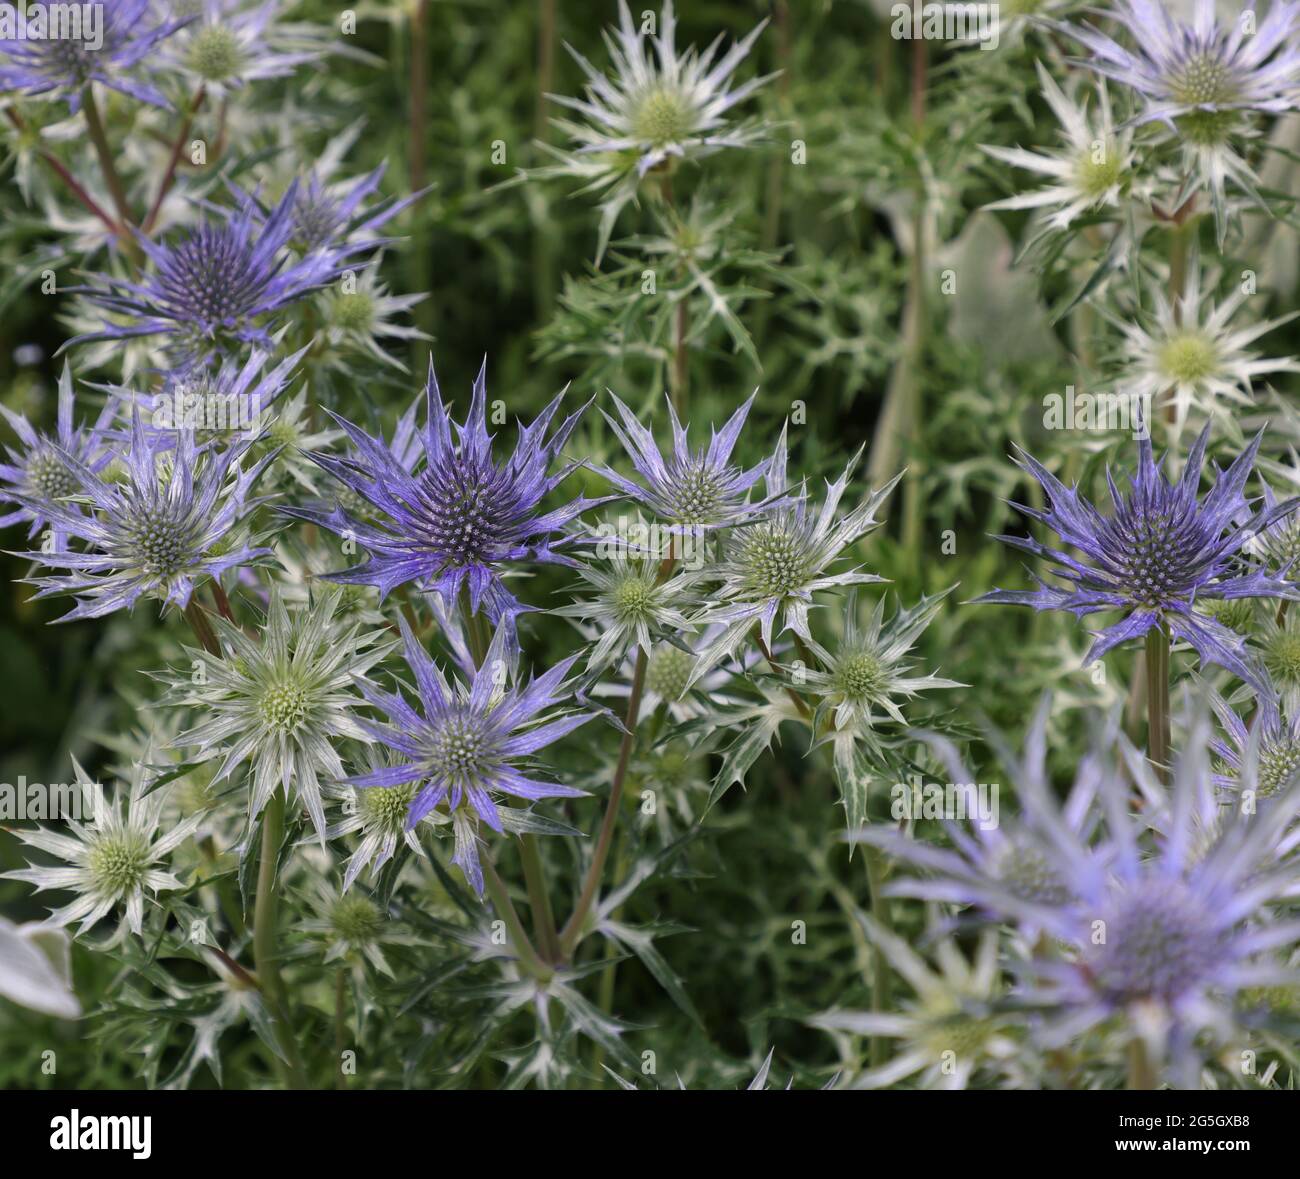 Flowers and leaves of Eryngium bourgatii Pico s Amethyst.. Stock Photo